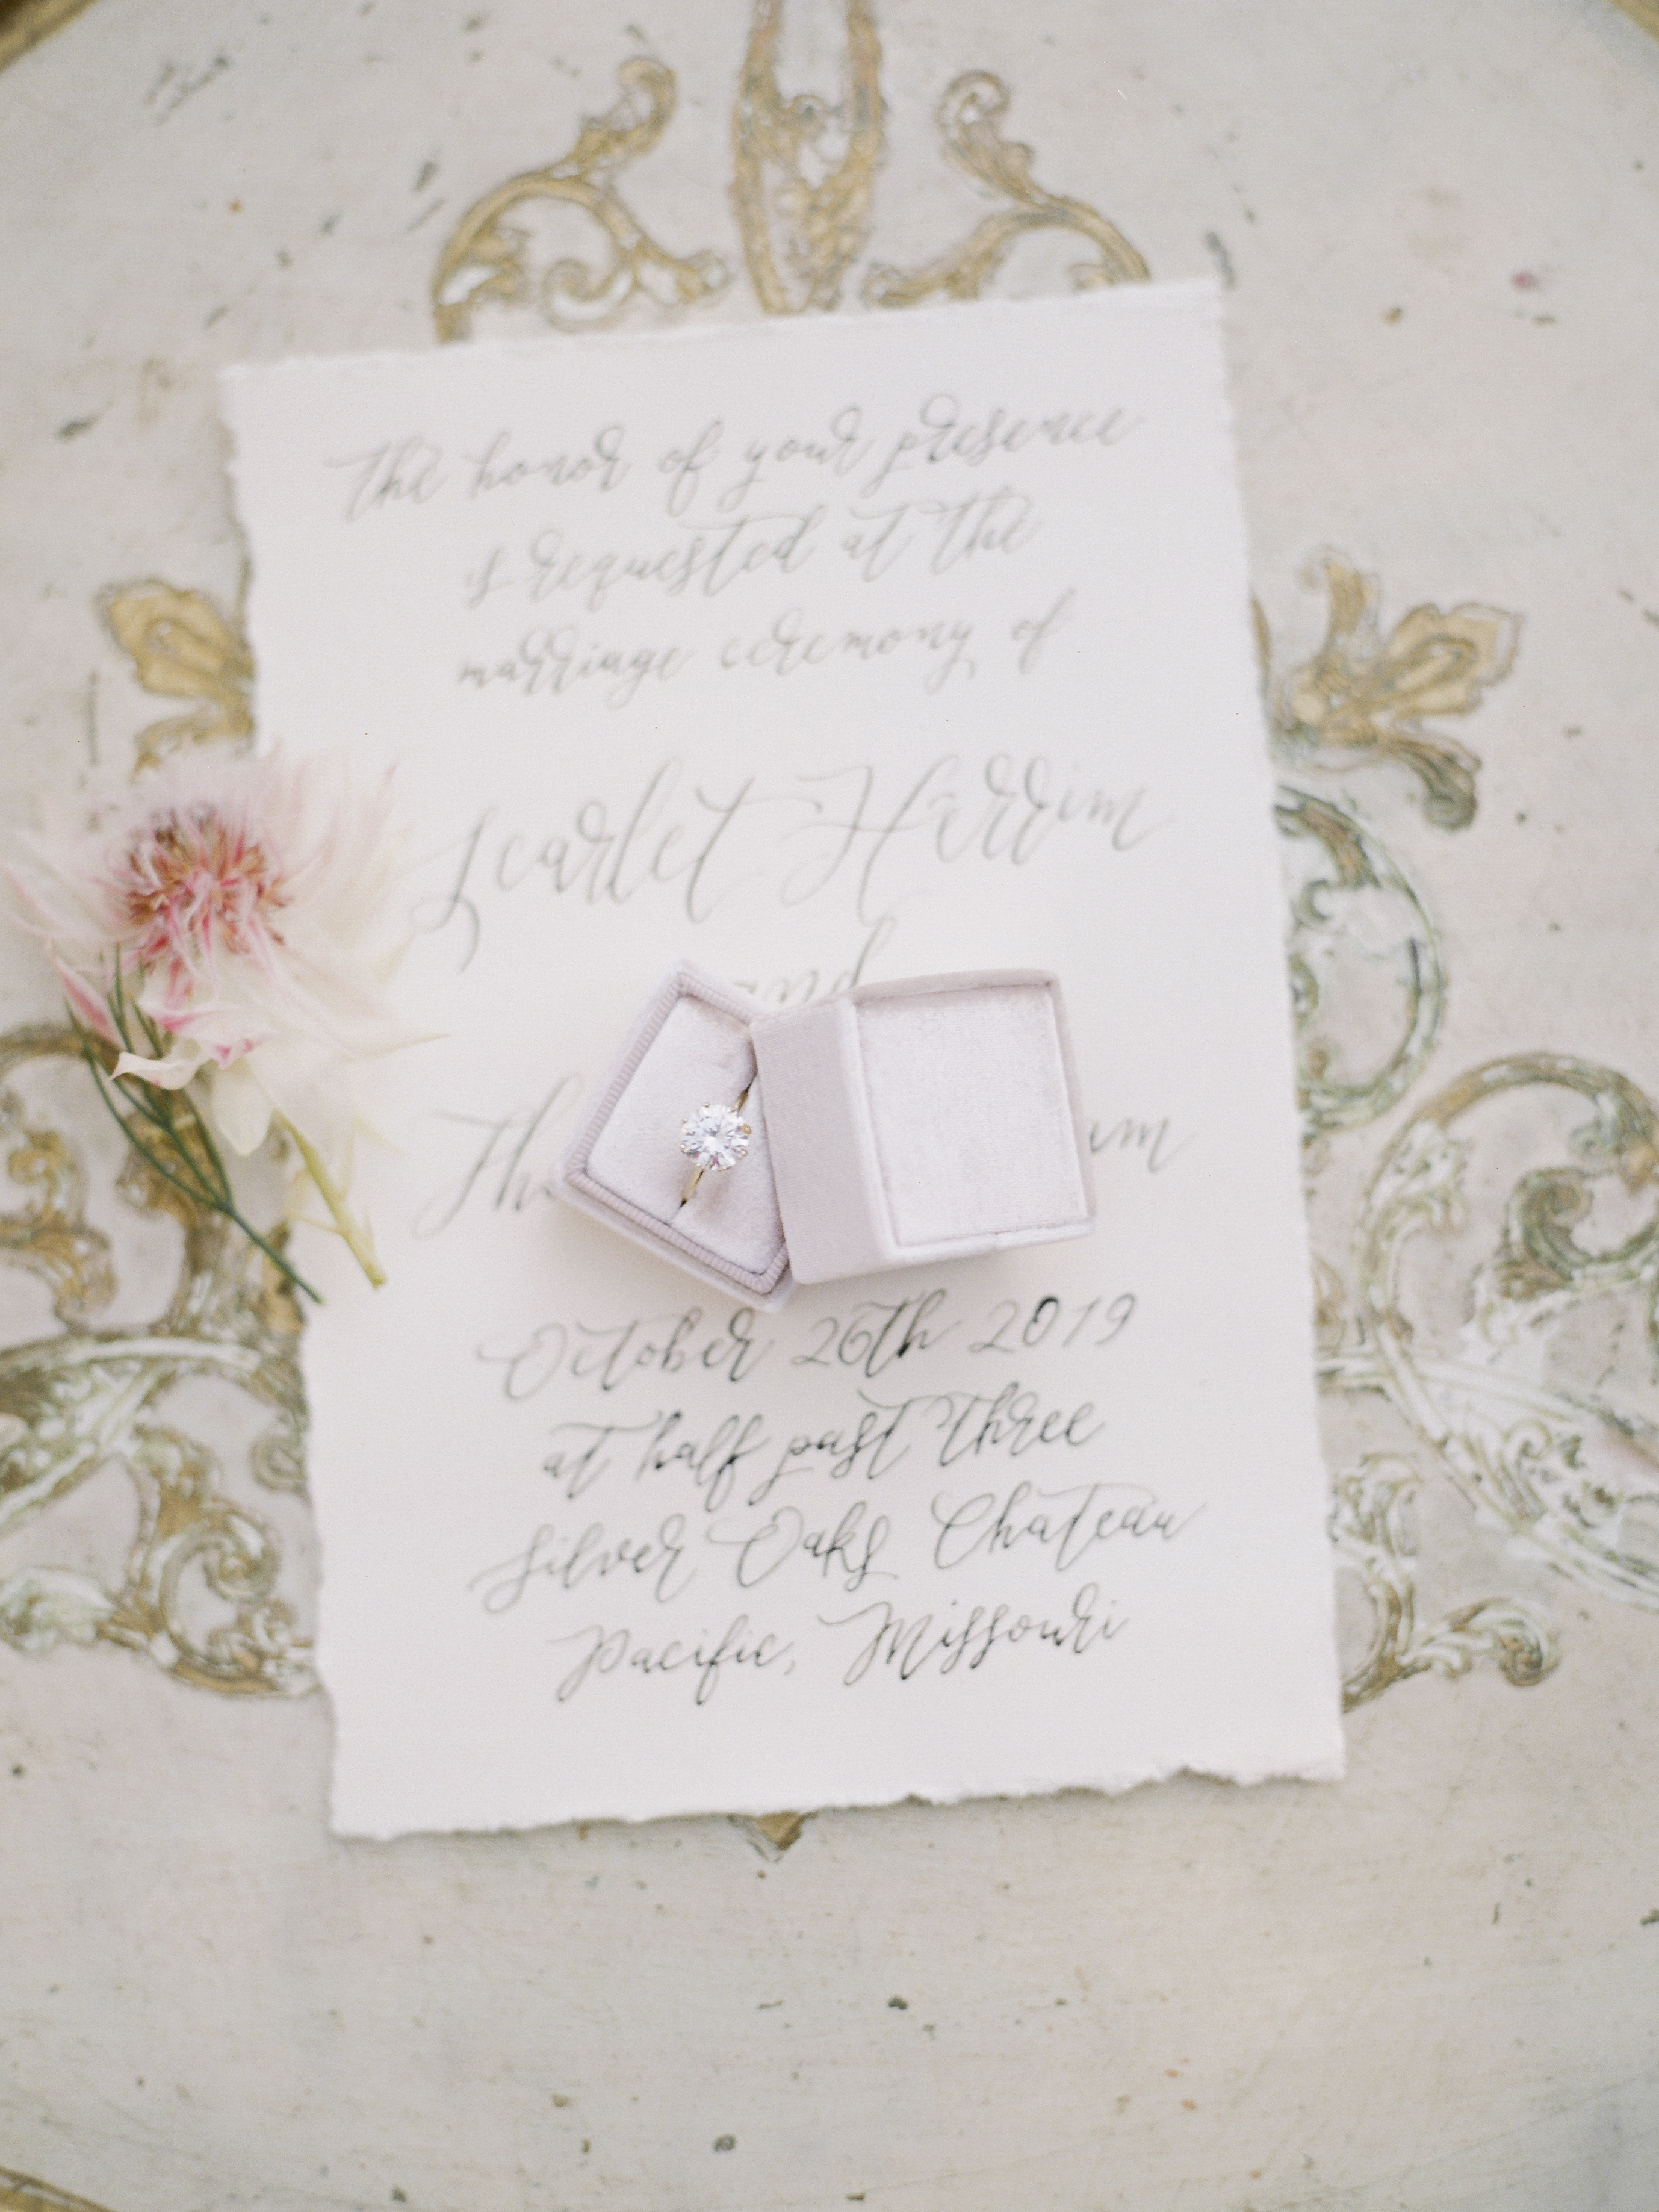 Gold solitaire engaement ring in a basket of diamonds by Lauren Priori Jewelery on handwritten wedding invitation by The Ink Cafe photographed by fine art wedding photographer Love Tree Studios in St. Louis Missouri.